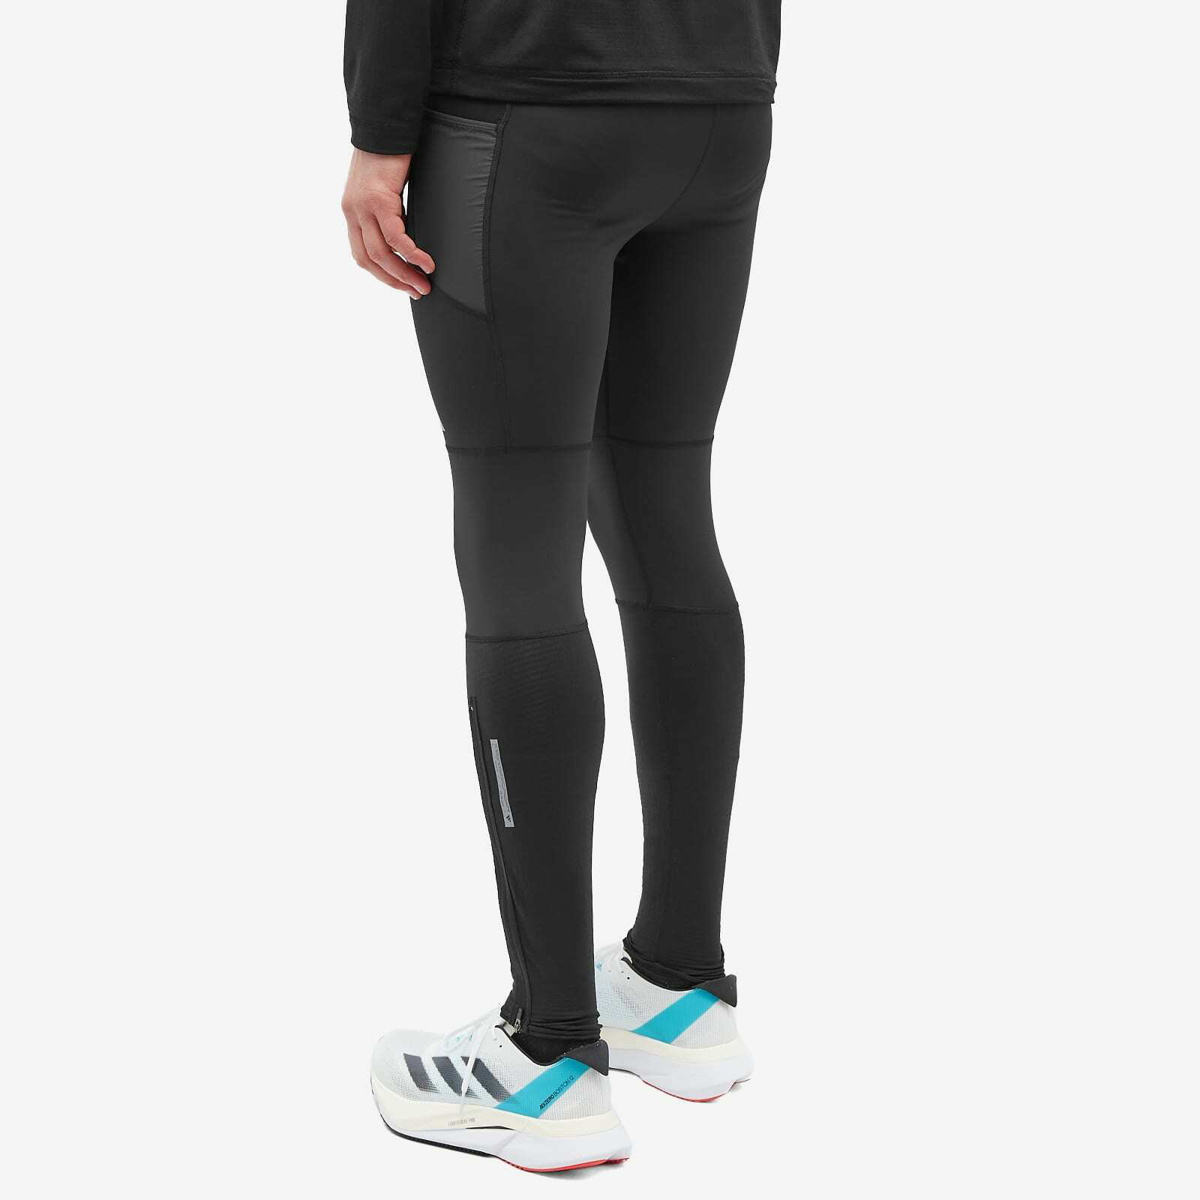 Best men's running tights: From Adidas to New Balance